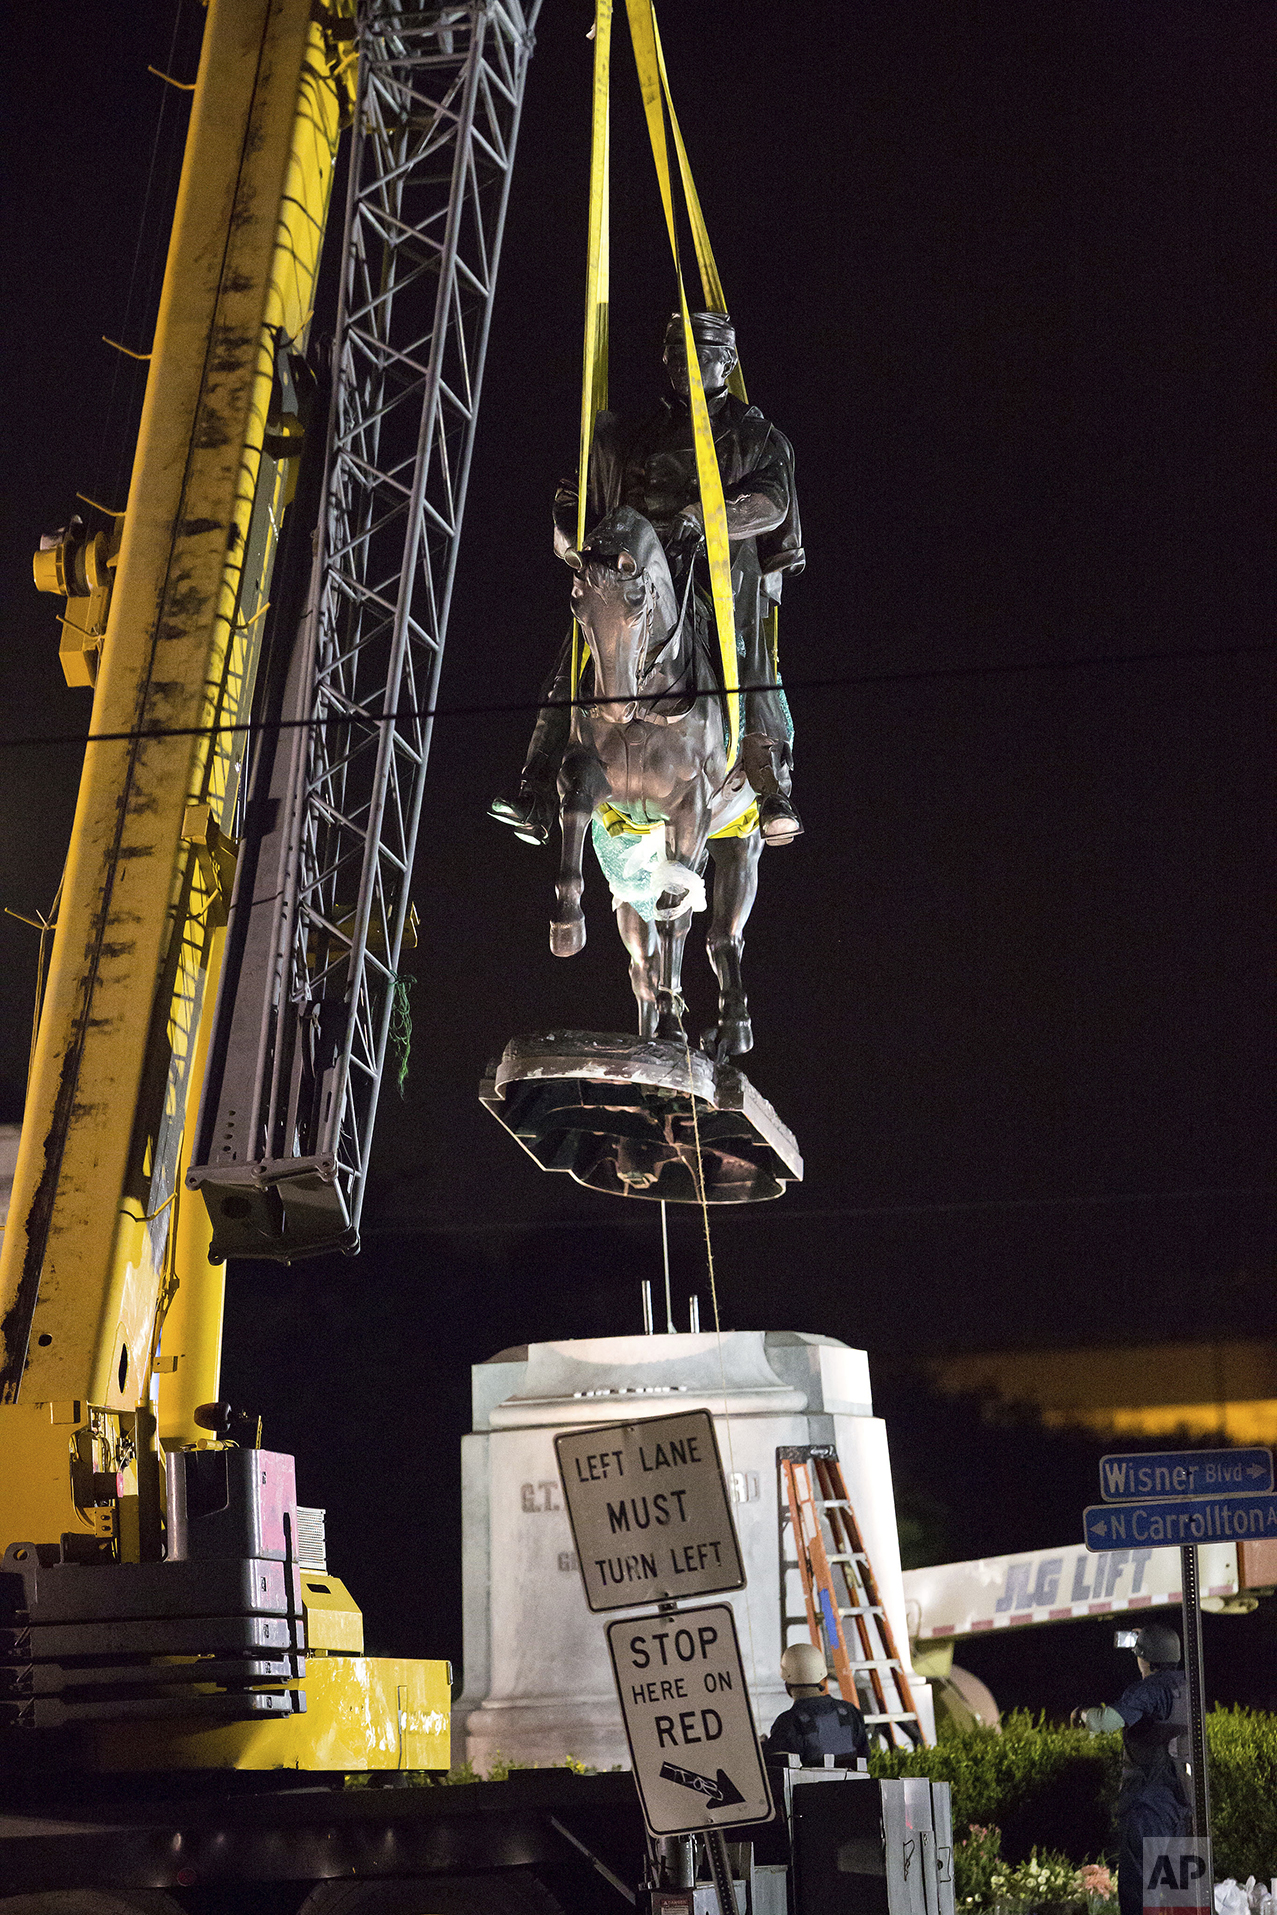  A statue of Confederate Gen. P.G.T. Beauregard is removed from the entrance to City Park in New Orleans, just after 3 a.m. Wednesday, May 17, 2017. The removal of the statue comes after the city has already taken down a statue of Jefferson Davis, th